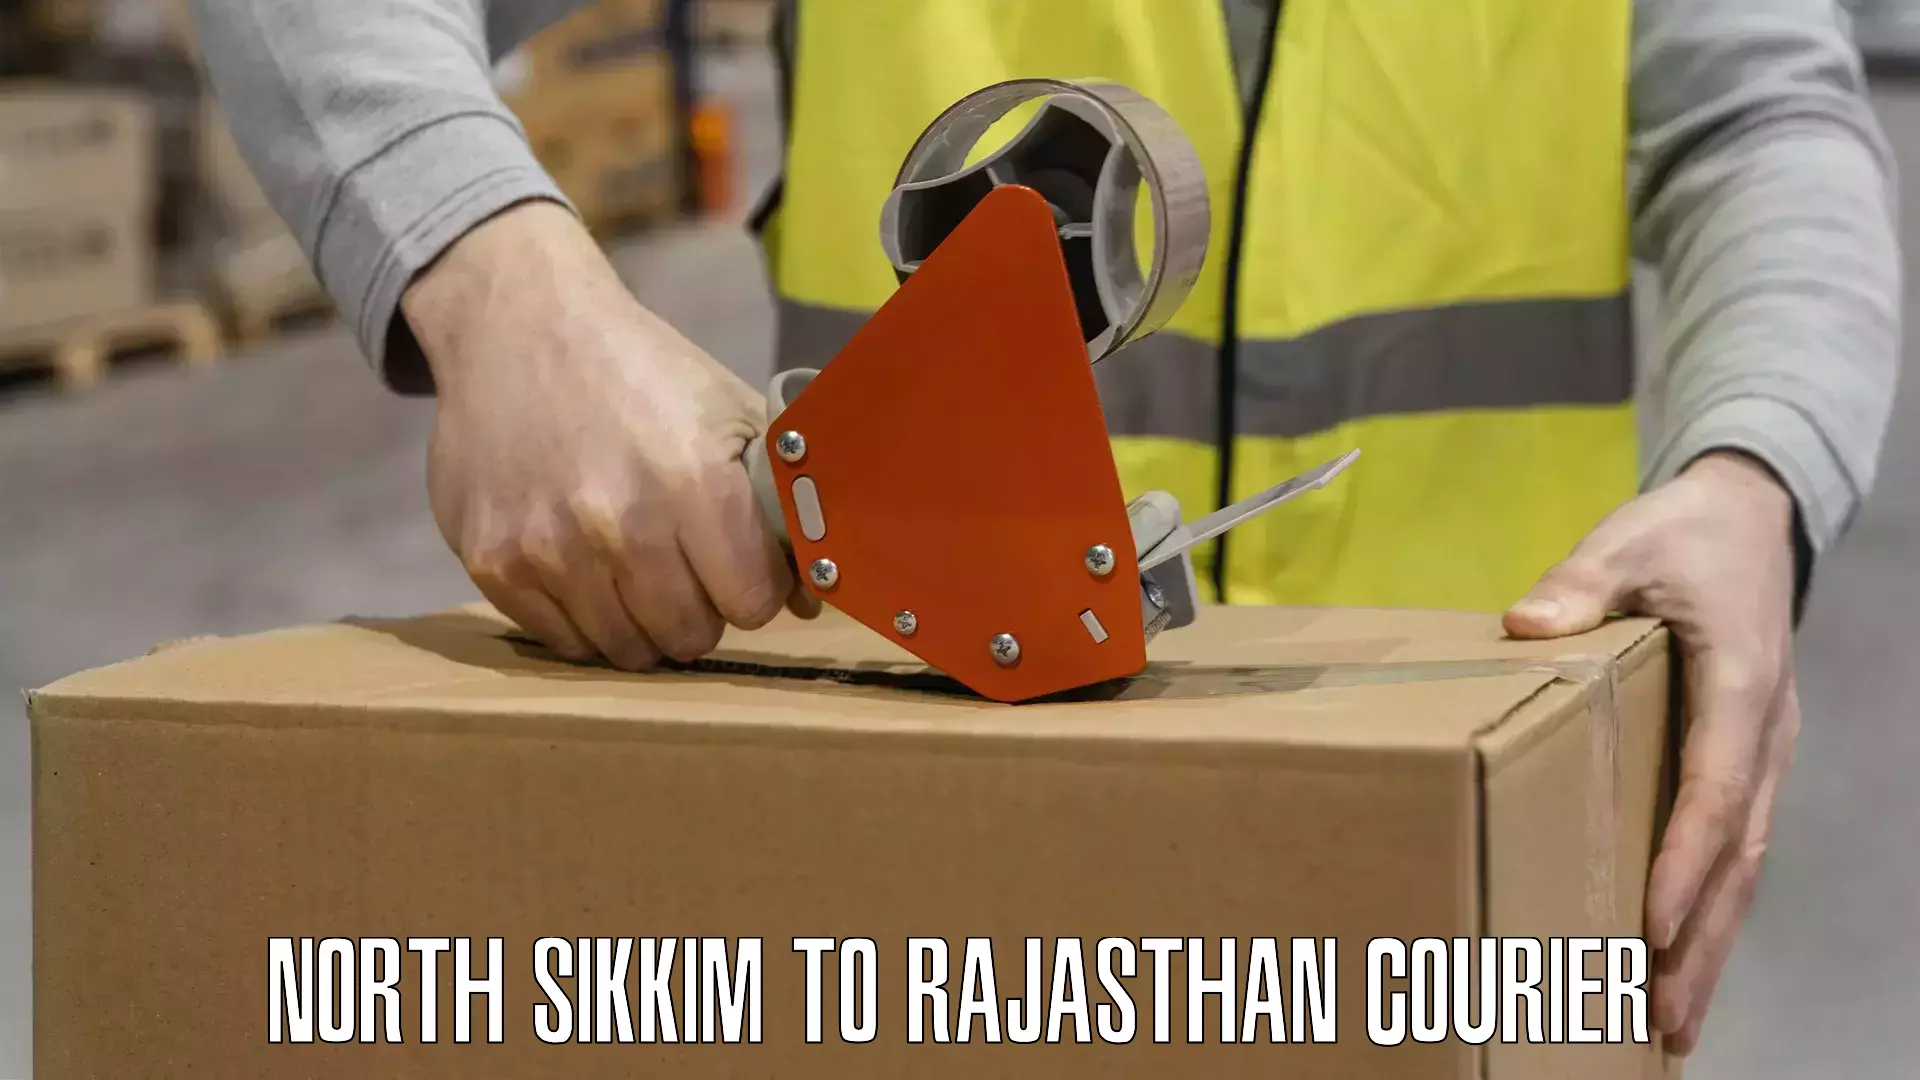 Track and trace shipping North Sikkim to Rajasthan